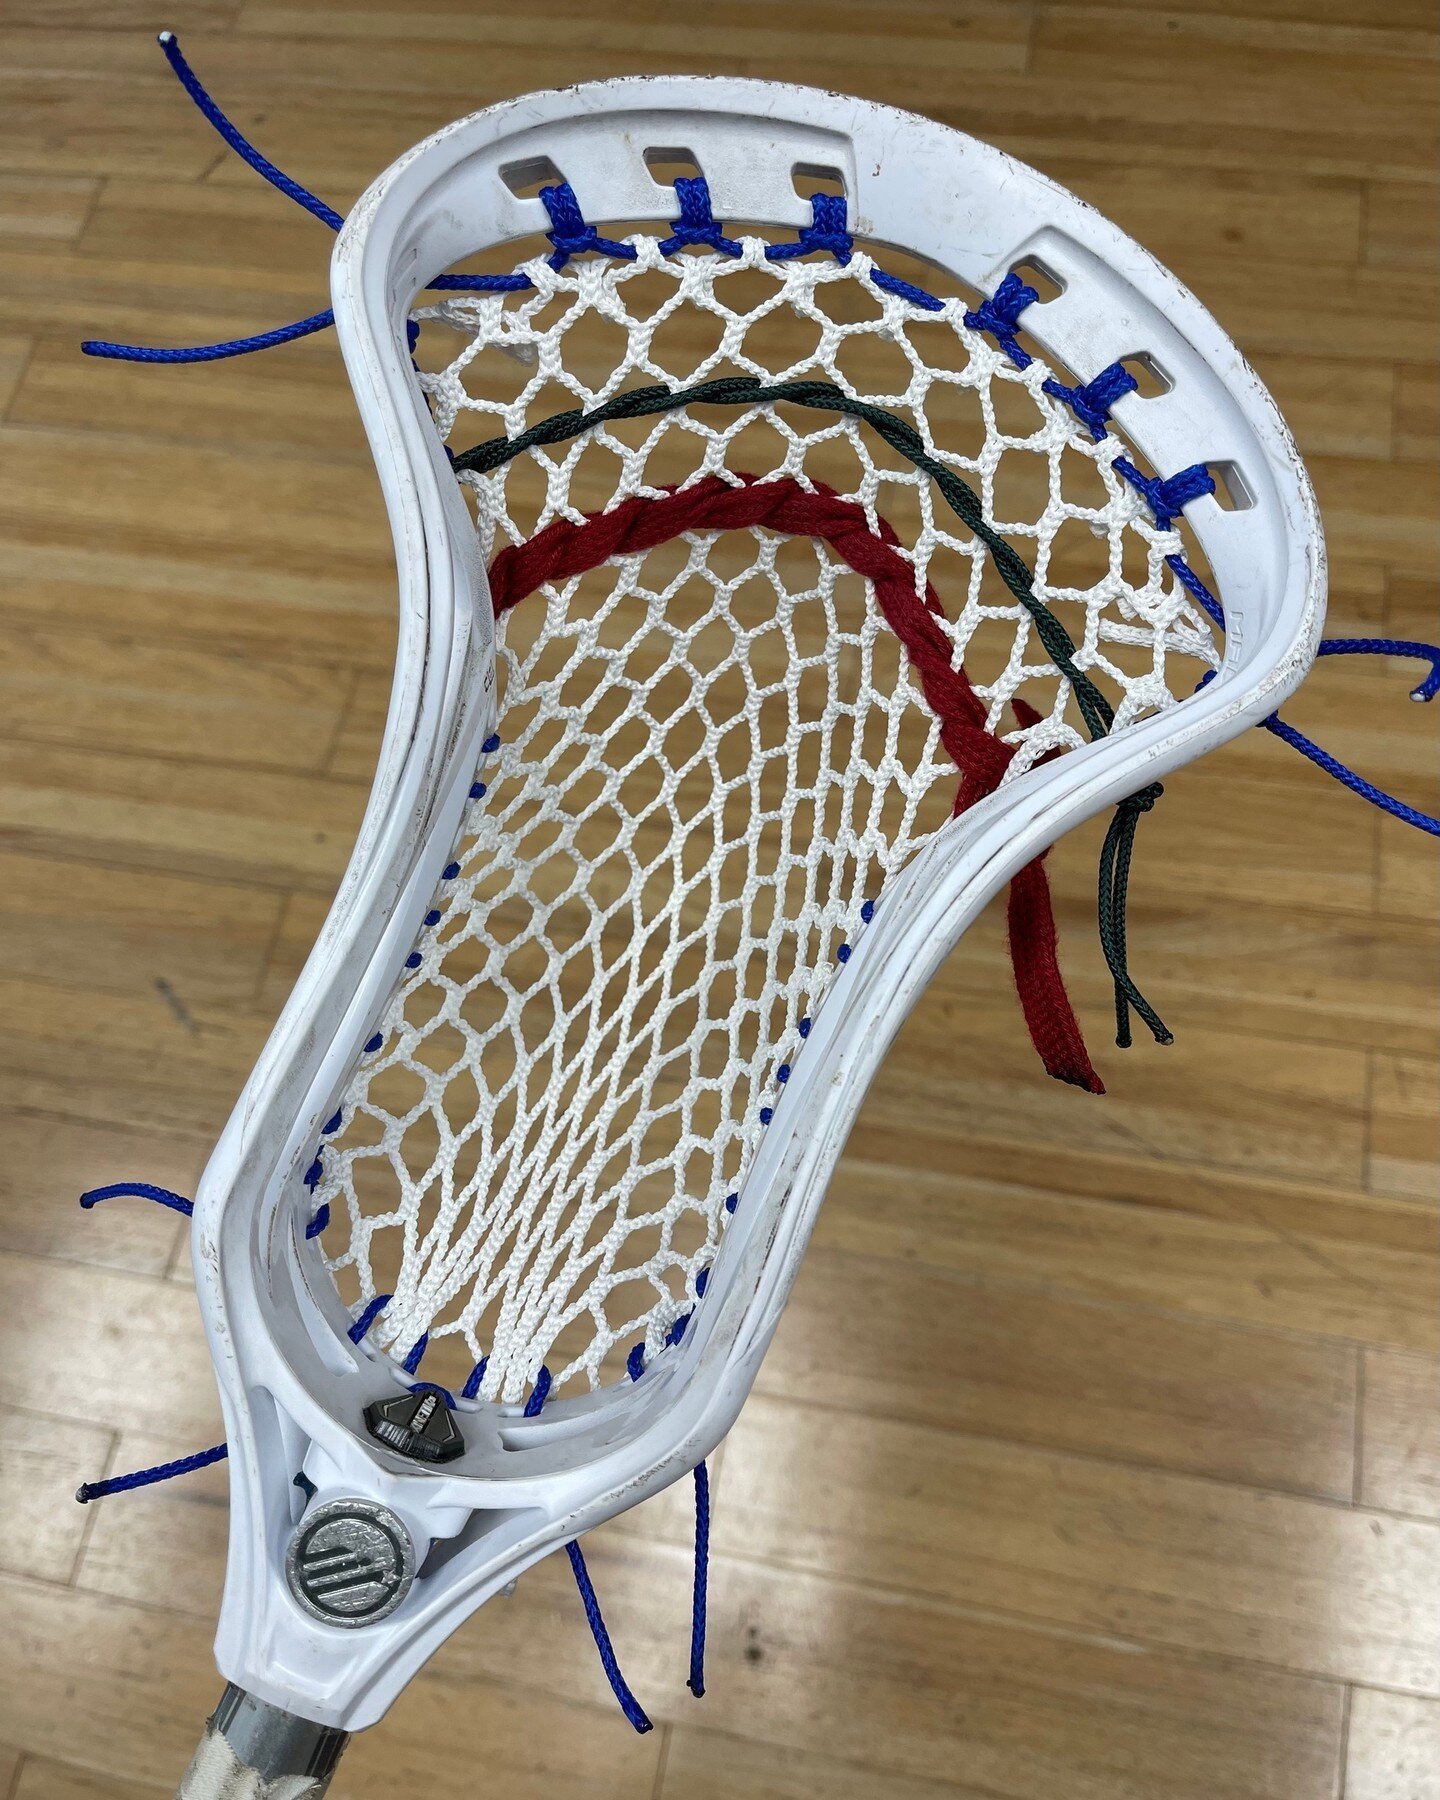 Another one for @oliver.devito (younger brother). @maveriklacrosse Kinetik 2.0 tied up with some @stringking Type 4s

#nsalax #nsastrung #customstrung #norcallax #bayarealax #lax #lacrosse #laxstick #lacrossestick  #lacrosselife #laxislife #laxhead  